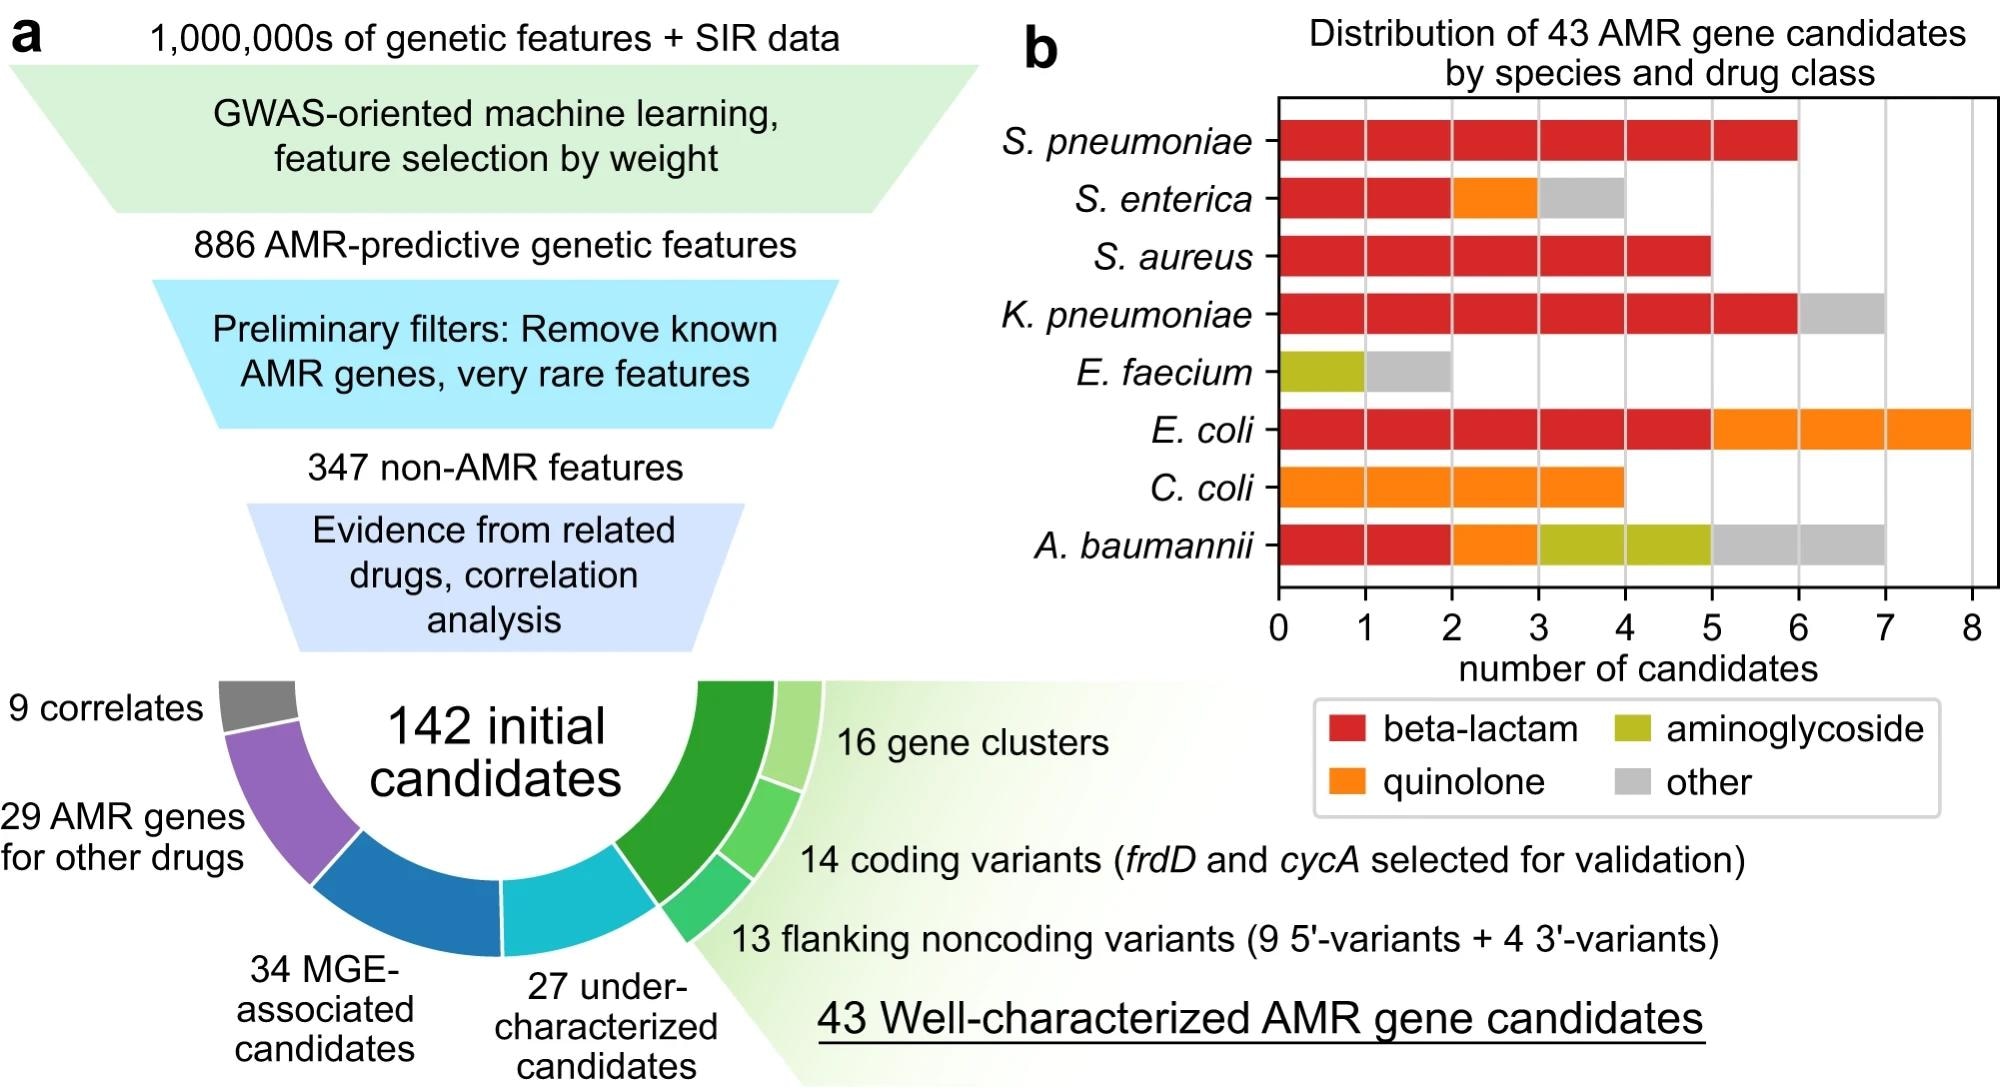 a Candidate identification workflow. From each trained AMR-ML model, the top 10 predictive features were identified, filtered for features that are neither known AMR genes nor very rare, ranked based on statistical evidence for resistance in other related drugs, and finally categorized by functional annotation. When multiple features related to the same gene were predictive of resistance, the feature with the strongest evidence was selected and the others were labeled as correlates. Mobile genetic element is abbreviated MGE. b Distribution of 43 well-characterized AMR gene candidates by species and drug class.